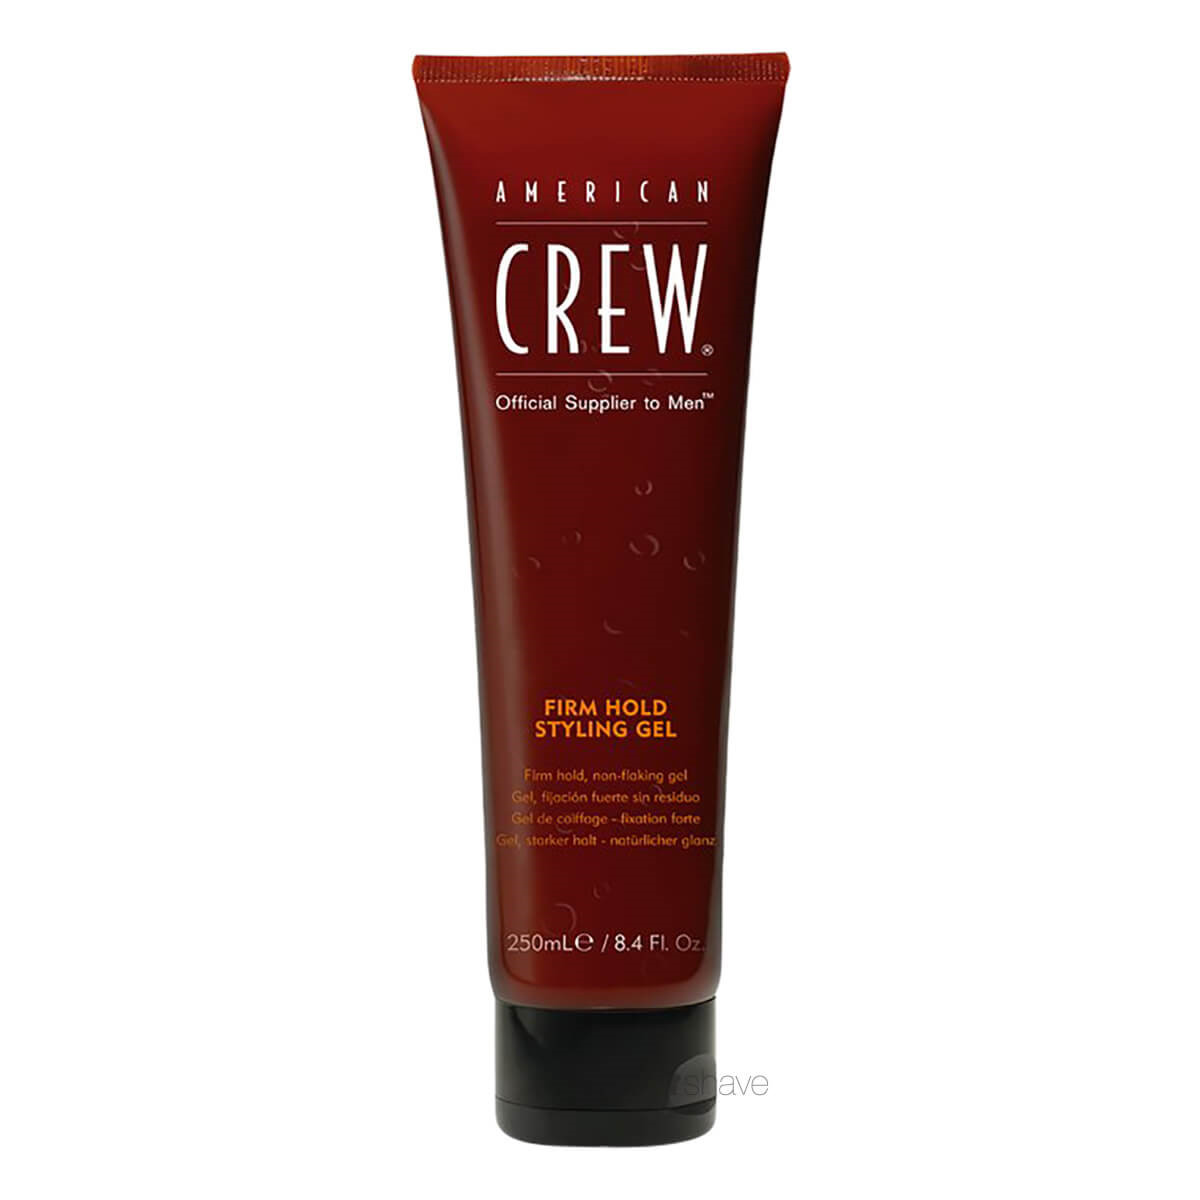 American Crew Firm Hold Styling Gel, 250 ml.